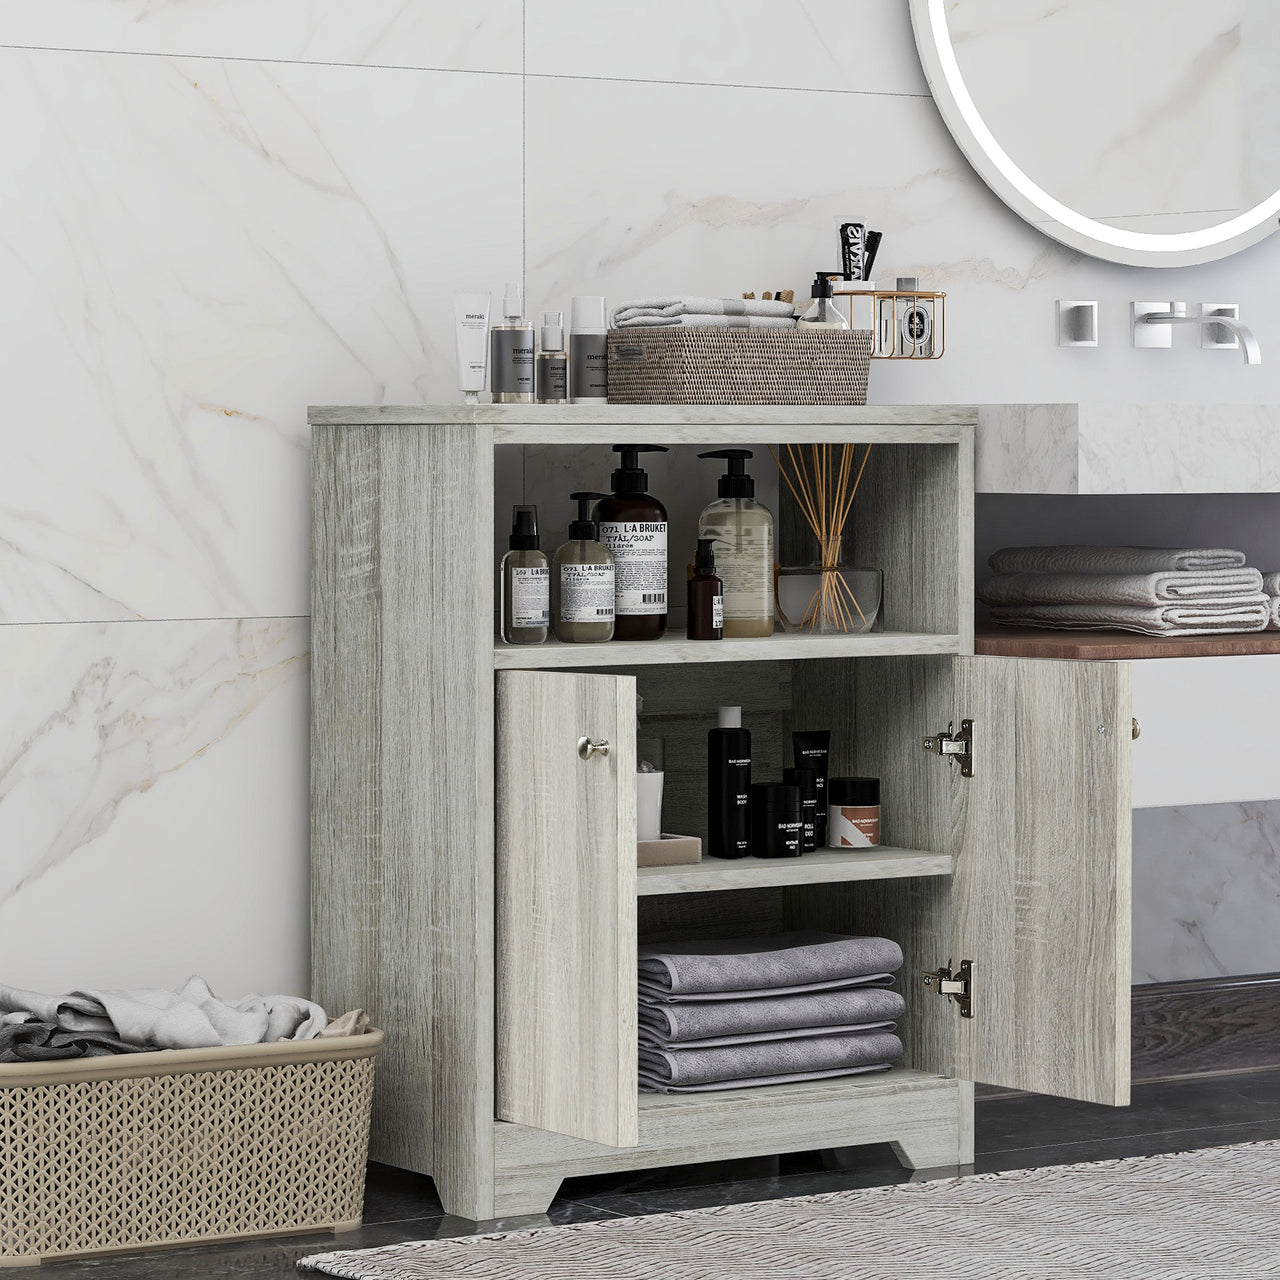 Bathroom Cabinet with Adjustable Shelves, Storage Cabinet for Home Kitchen, Freestanding Floor Cabinet Easy to Assemble